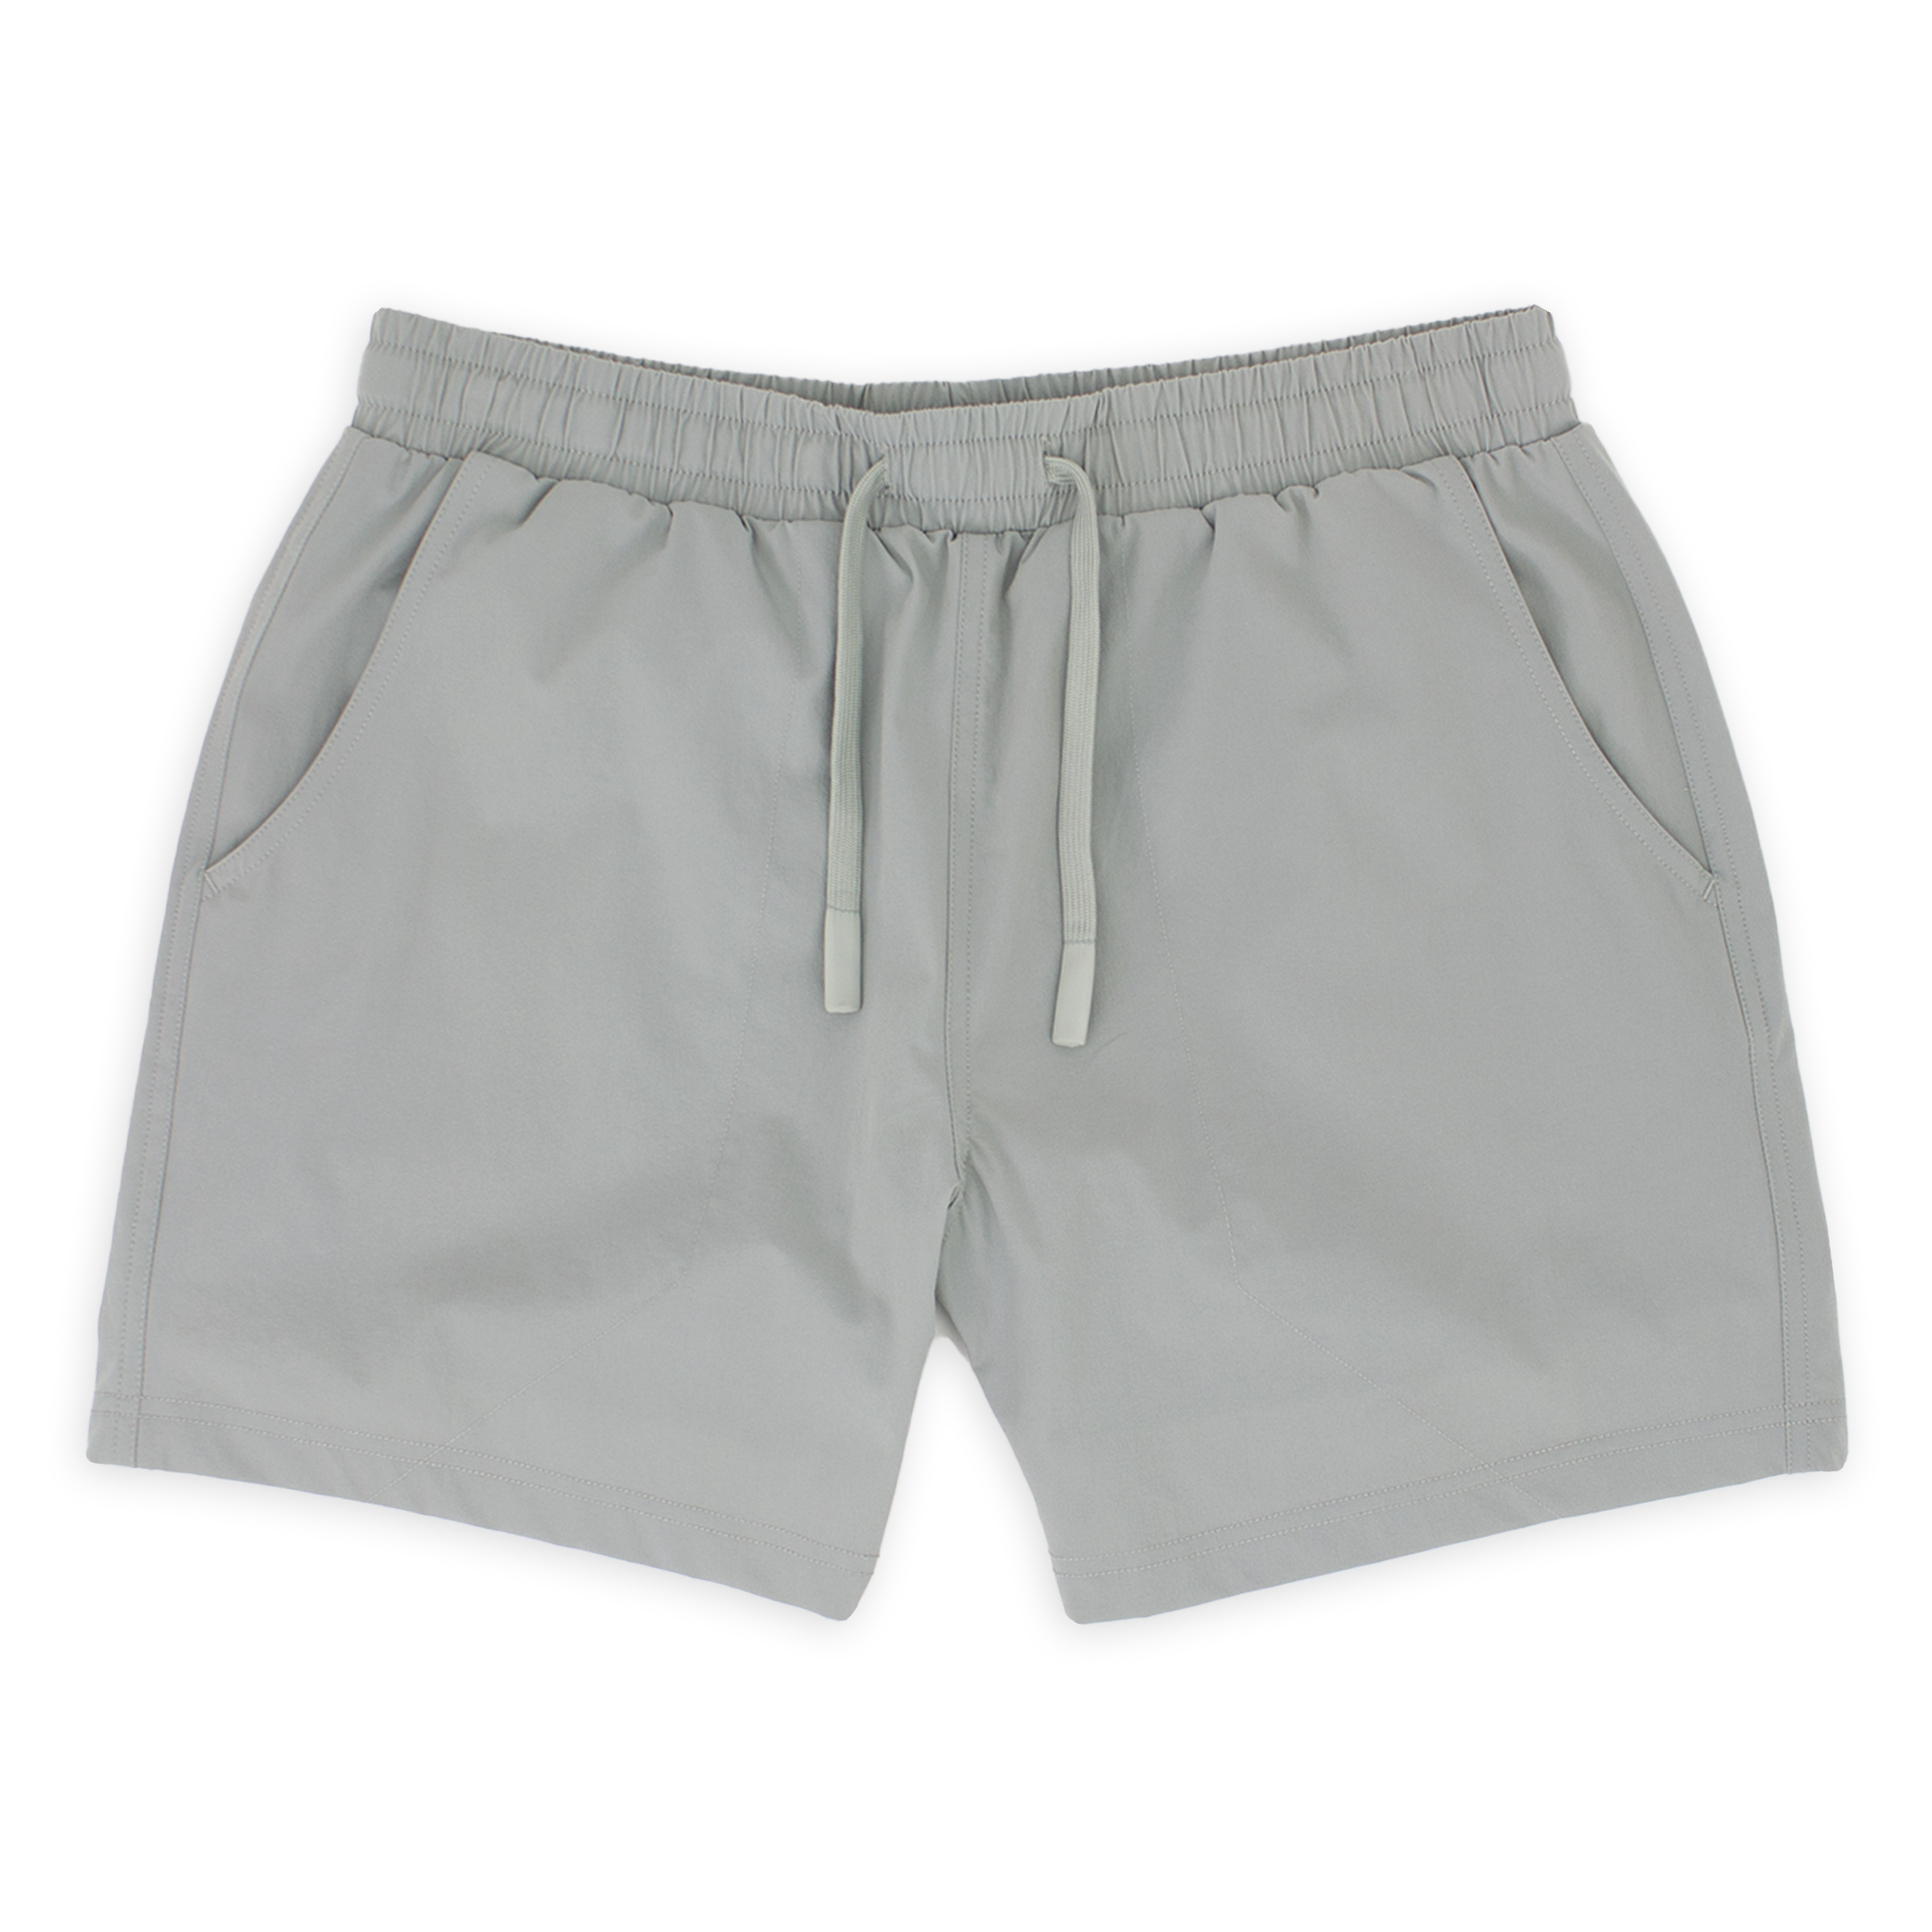 Base Short 5.5" Grey front with elastic waistband, dyed-to-match flat drawstring with rubberized tips, and two seam pockets